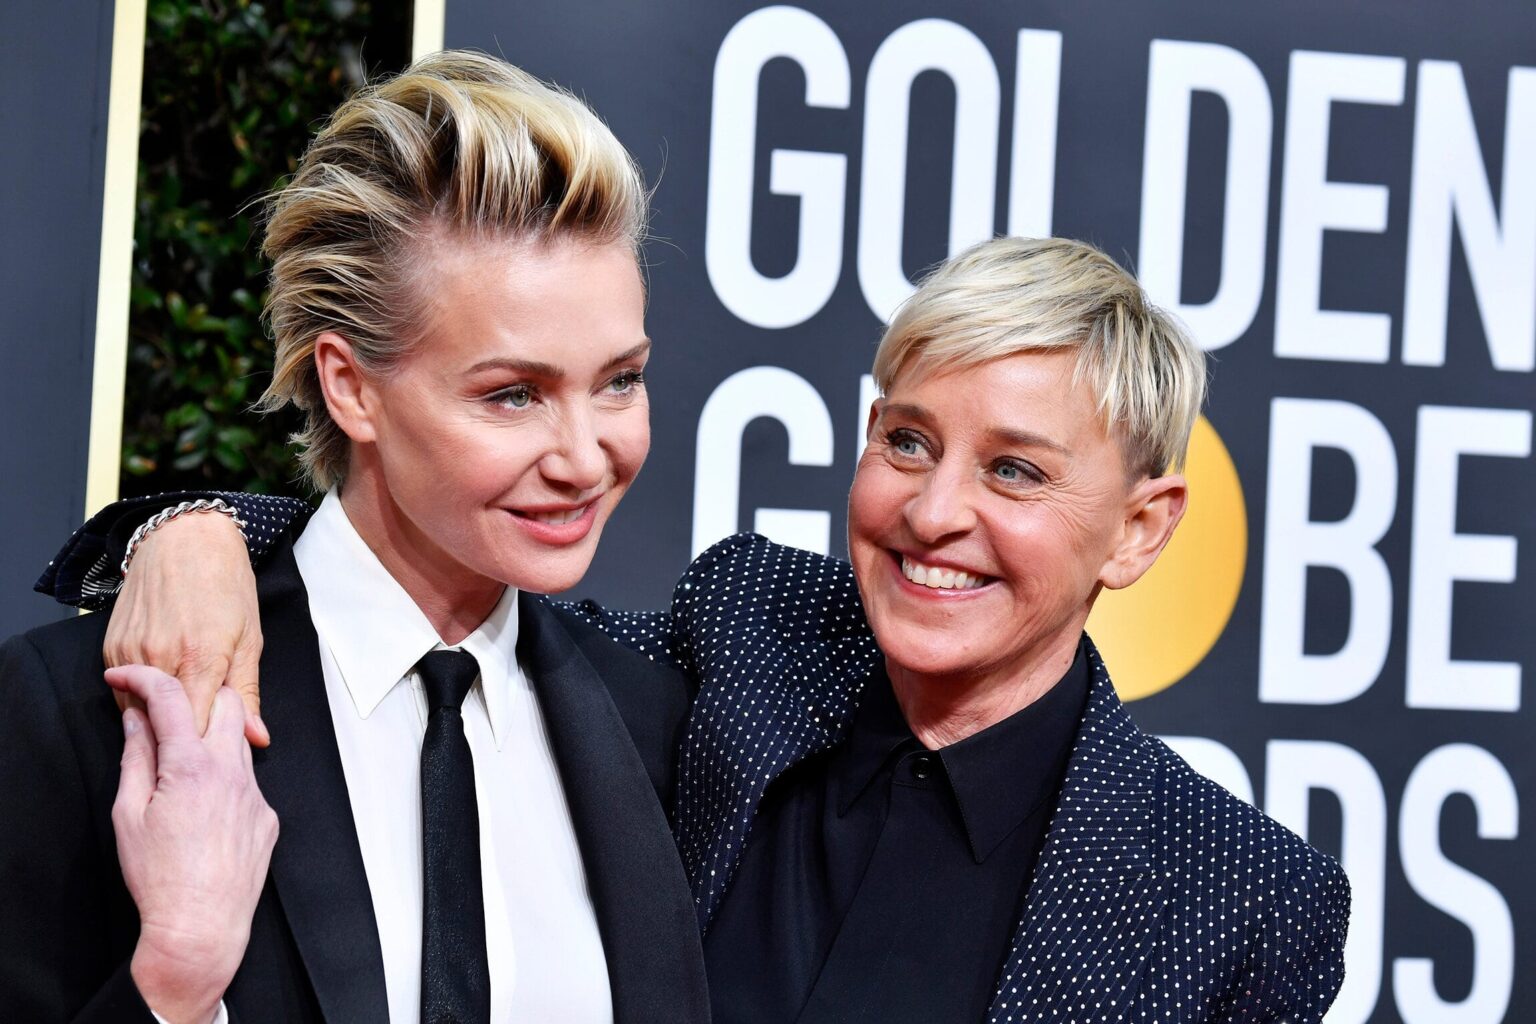 Rumors are running wild that Ellen DeGeneres' wife Portia de Rossi is ready to dump her. What's the controversy this time?